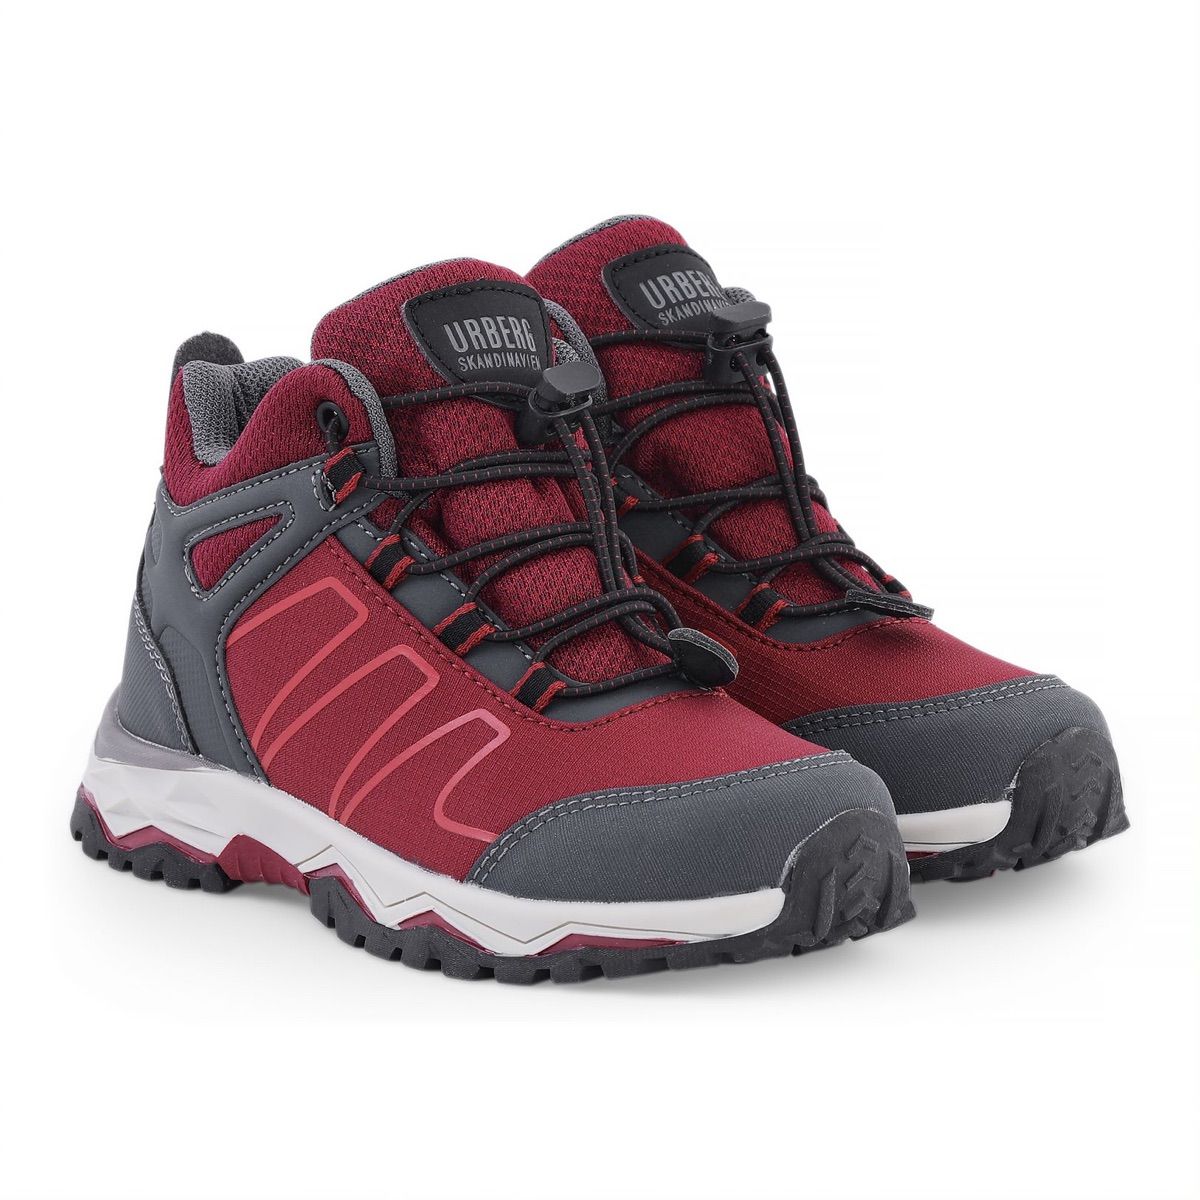 Urberg Fall Kid's Boot Rio Red